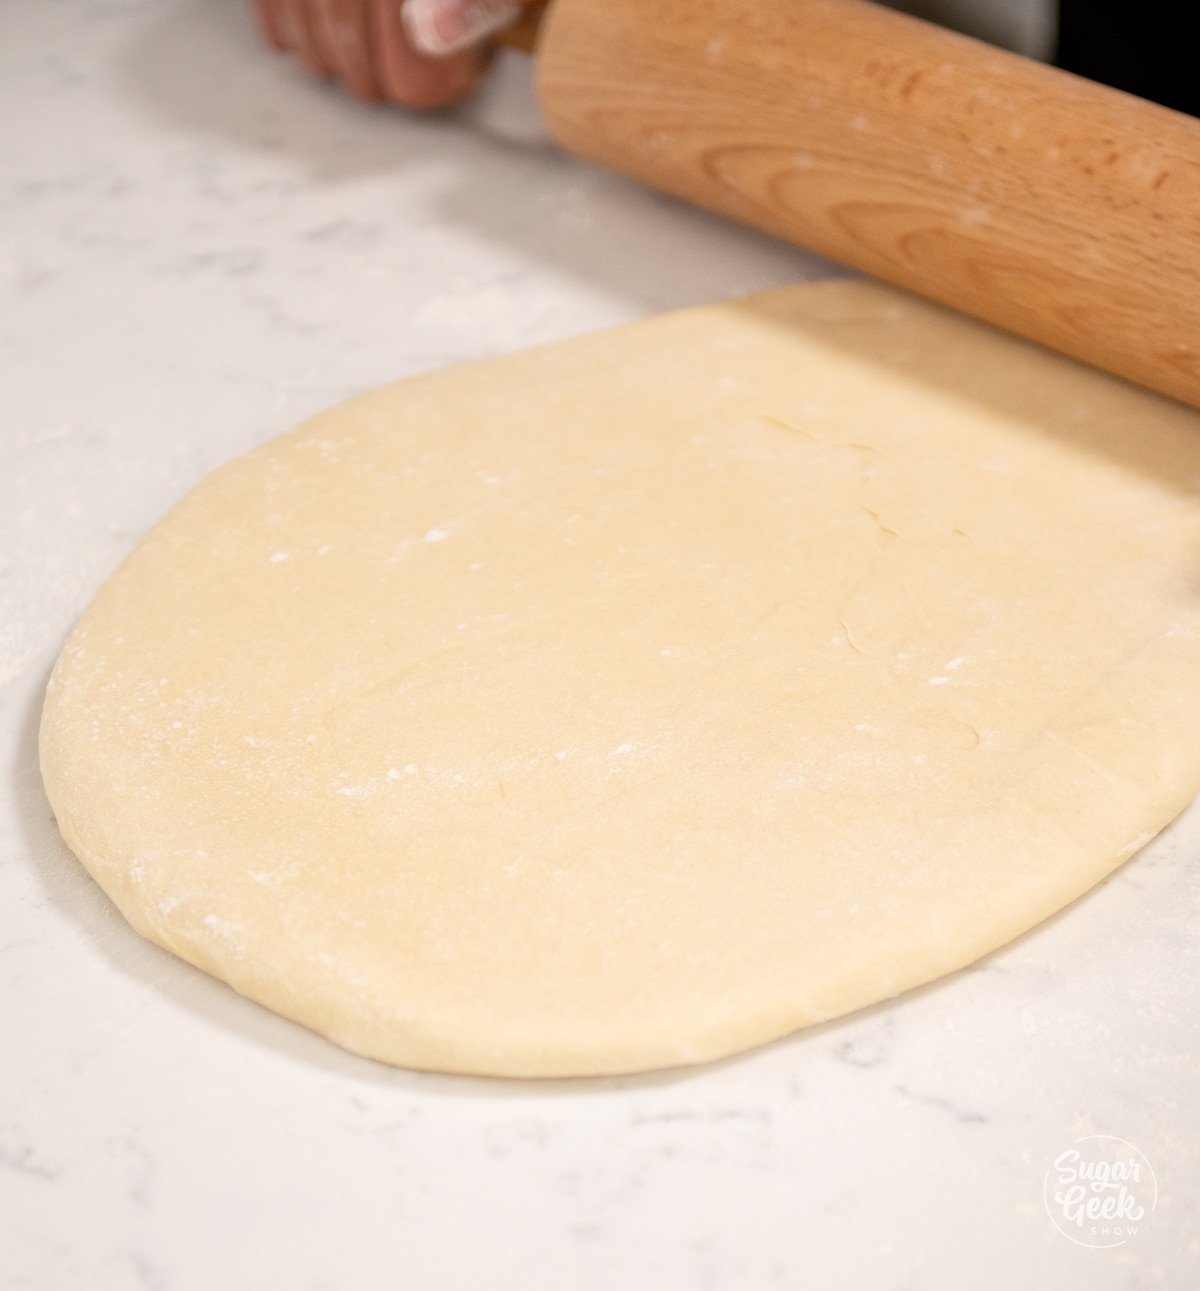 rolling pin pressing on croissant dough